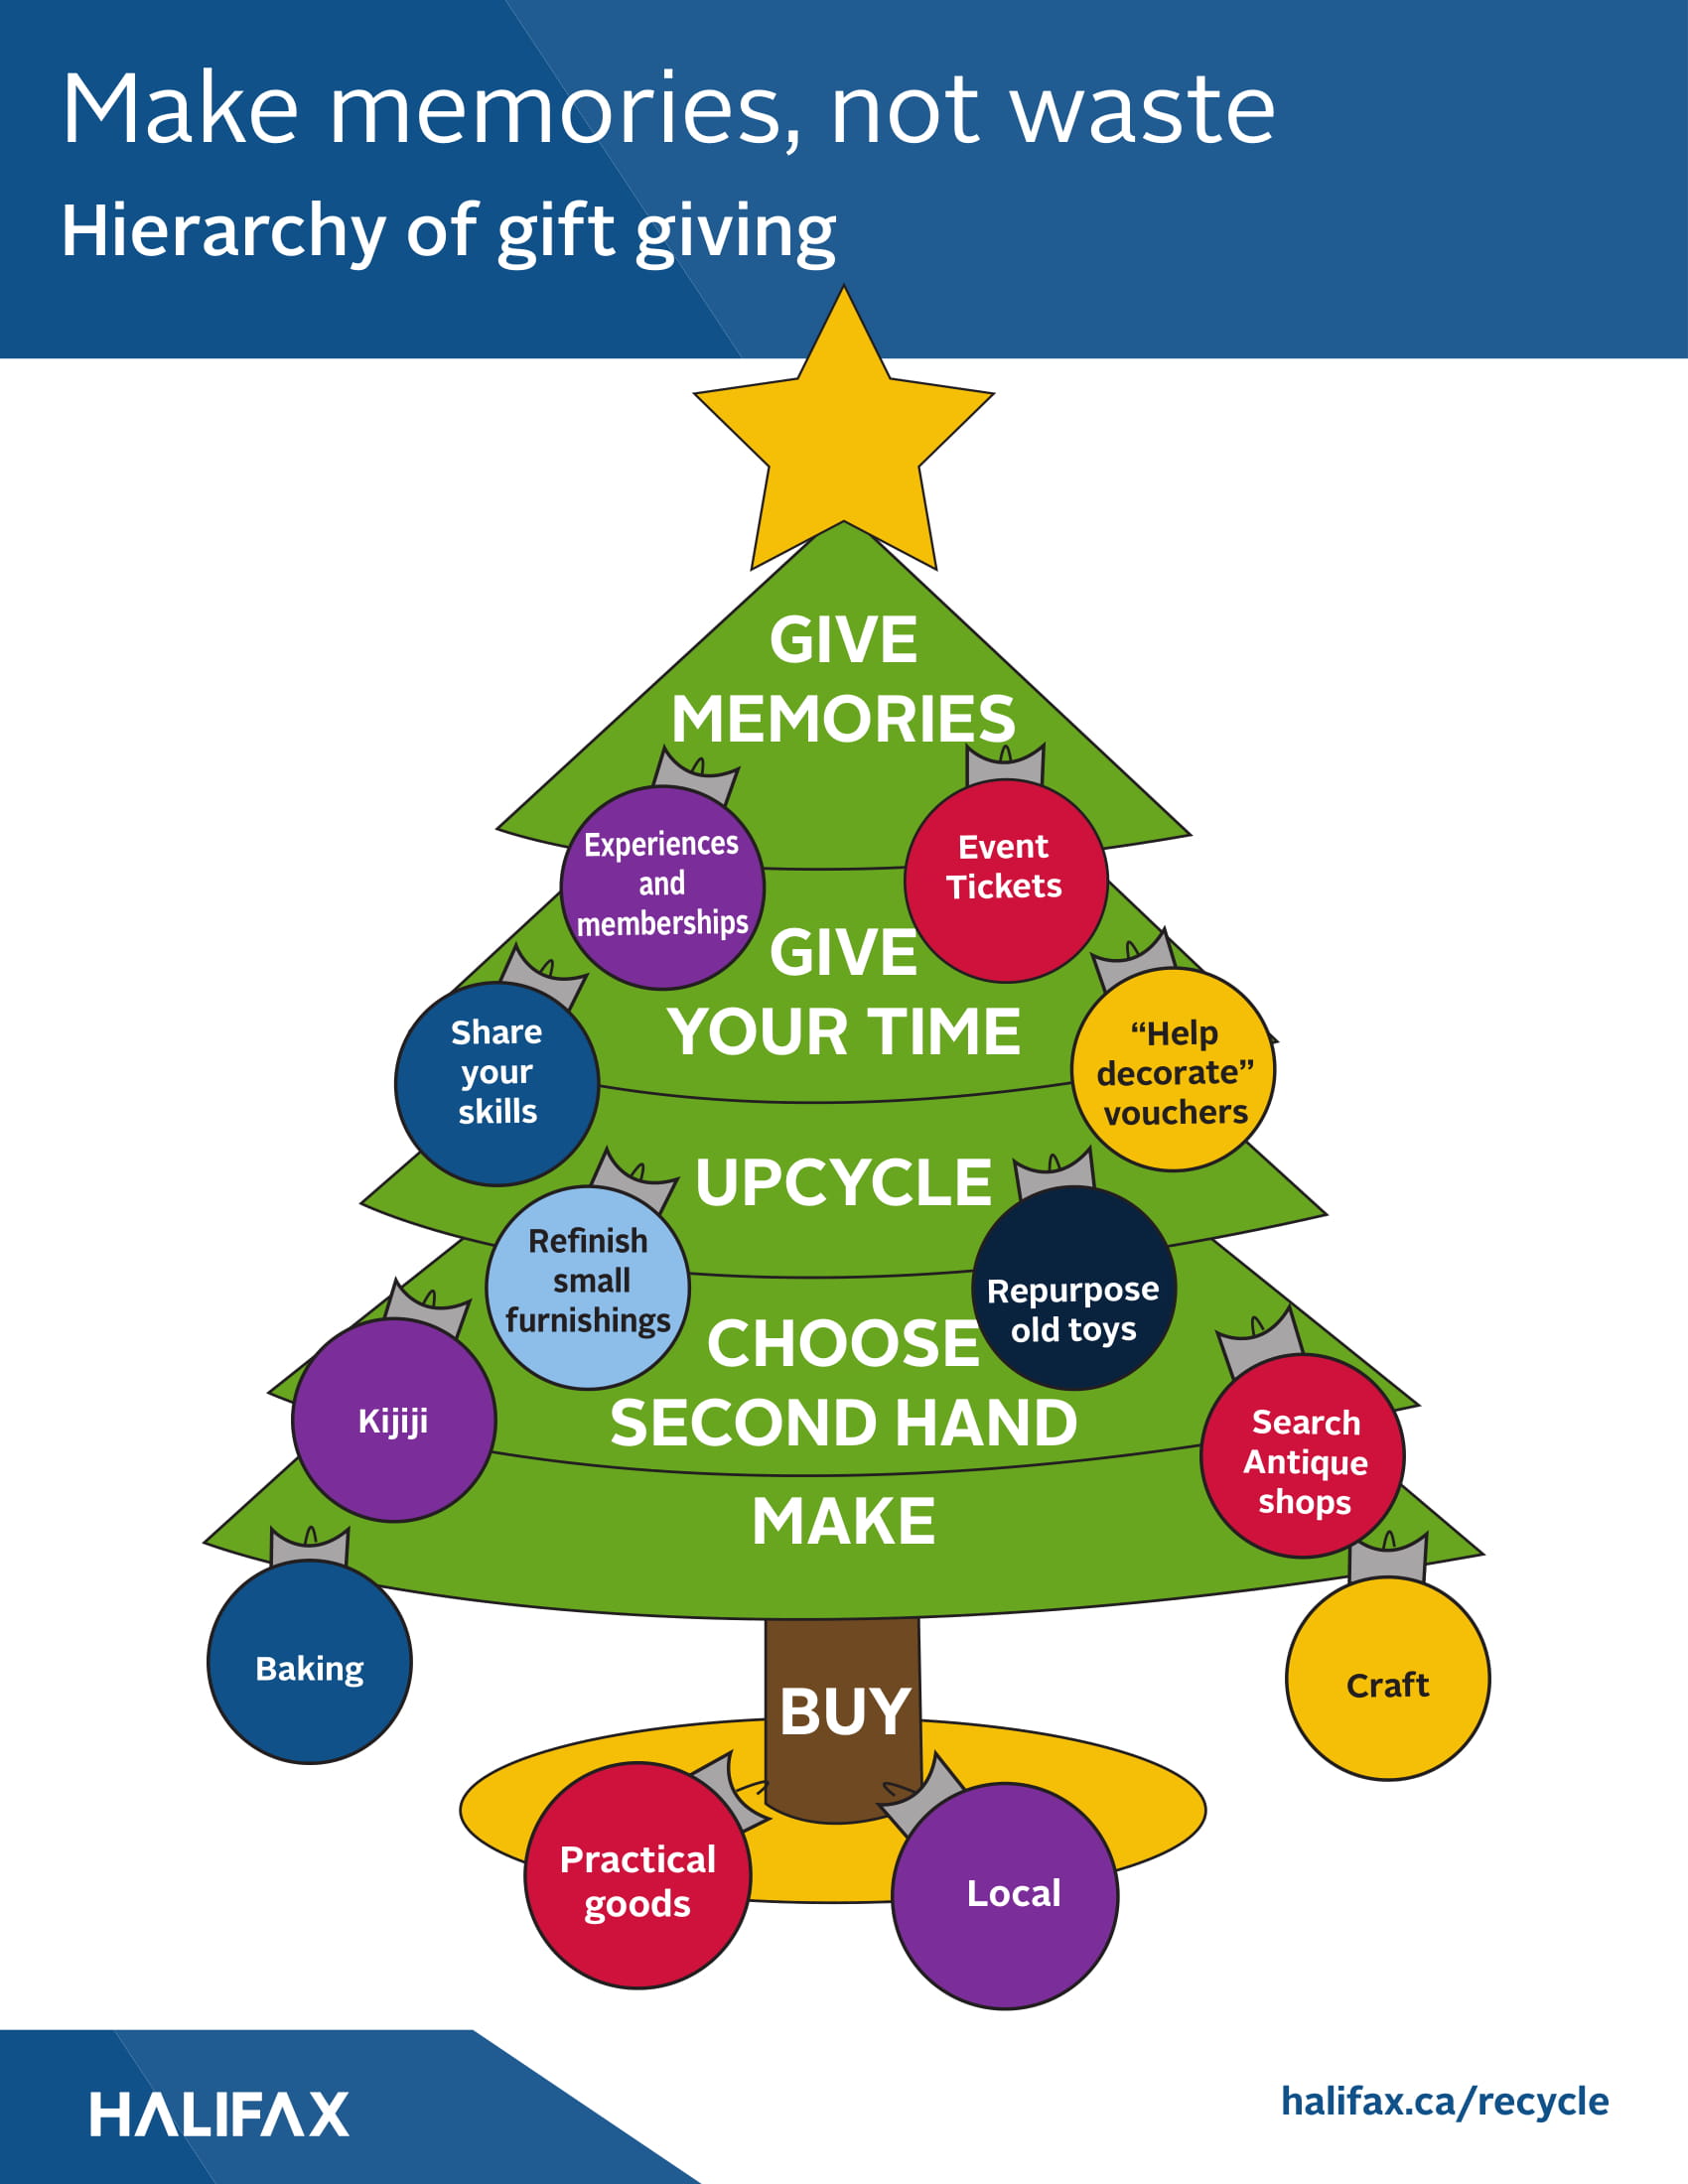 A hierarchy of gift giving options is presented in the shape of a Christmas Tree